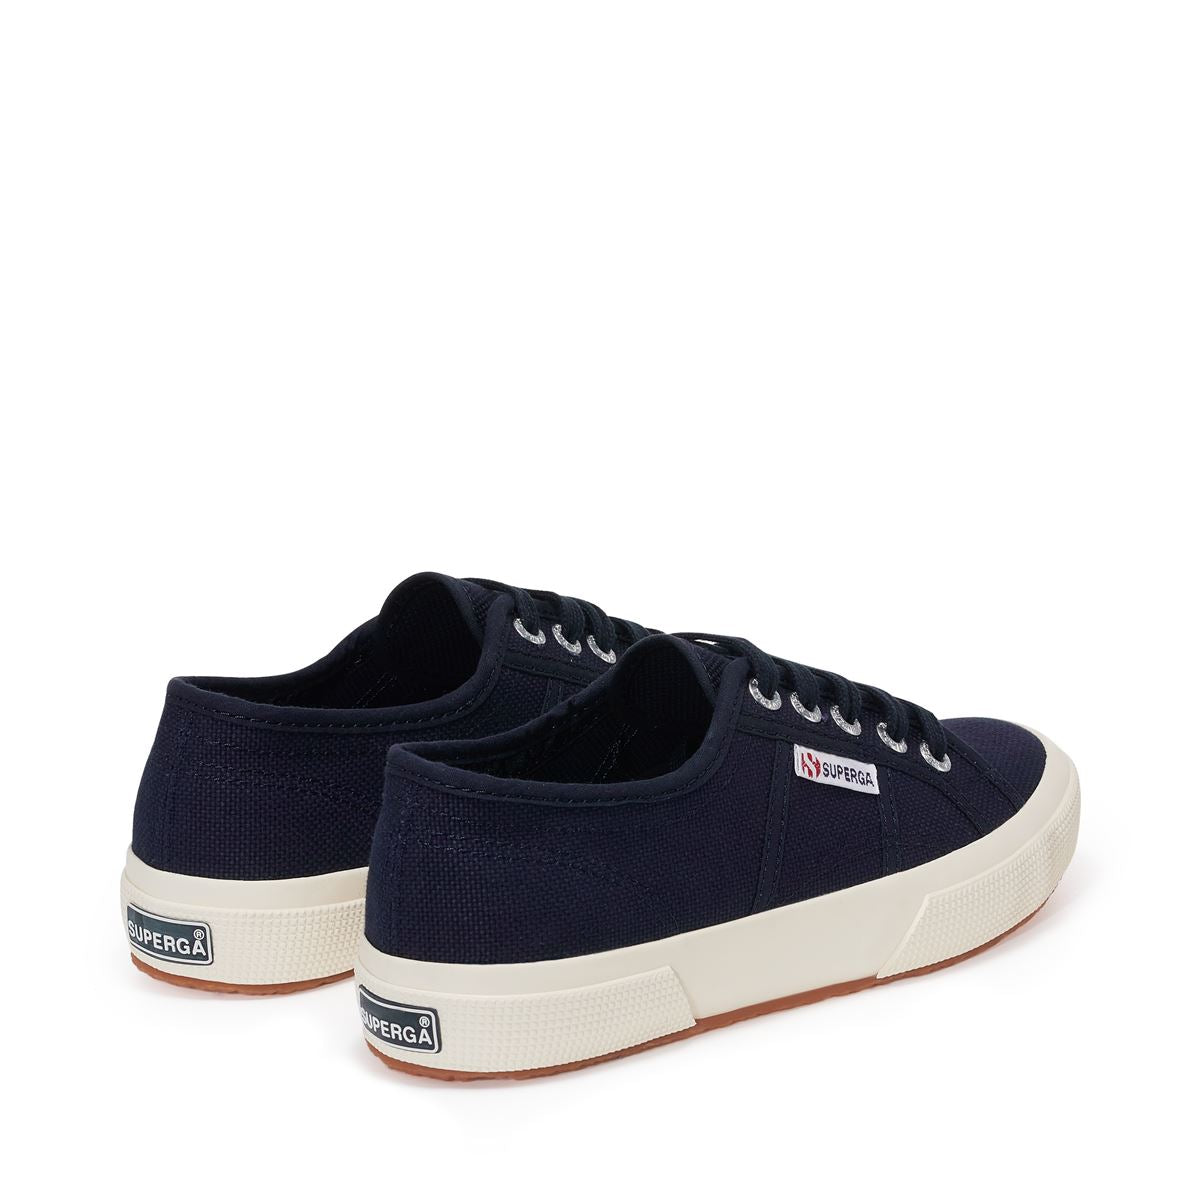 Superga 2750 Cotu Classic Sneakers - Navy Off White. Back view.